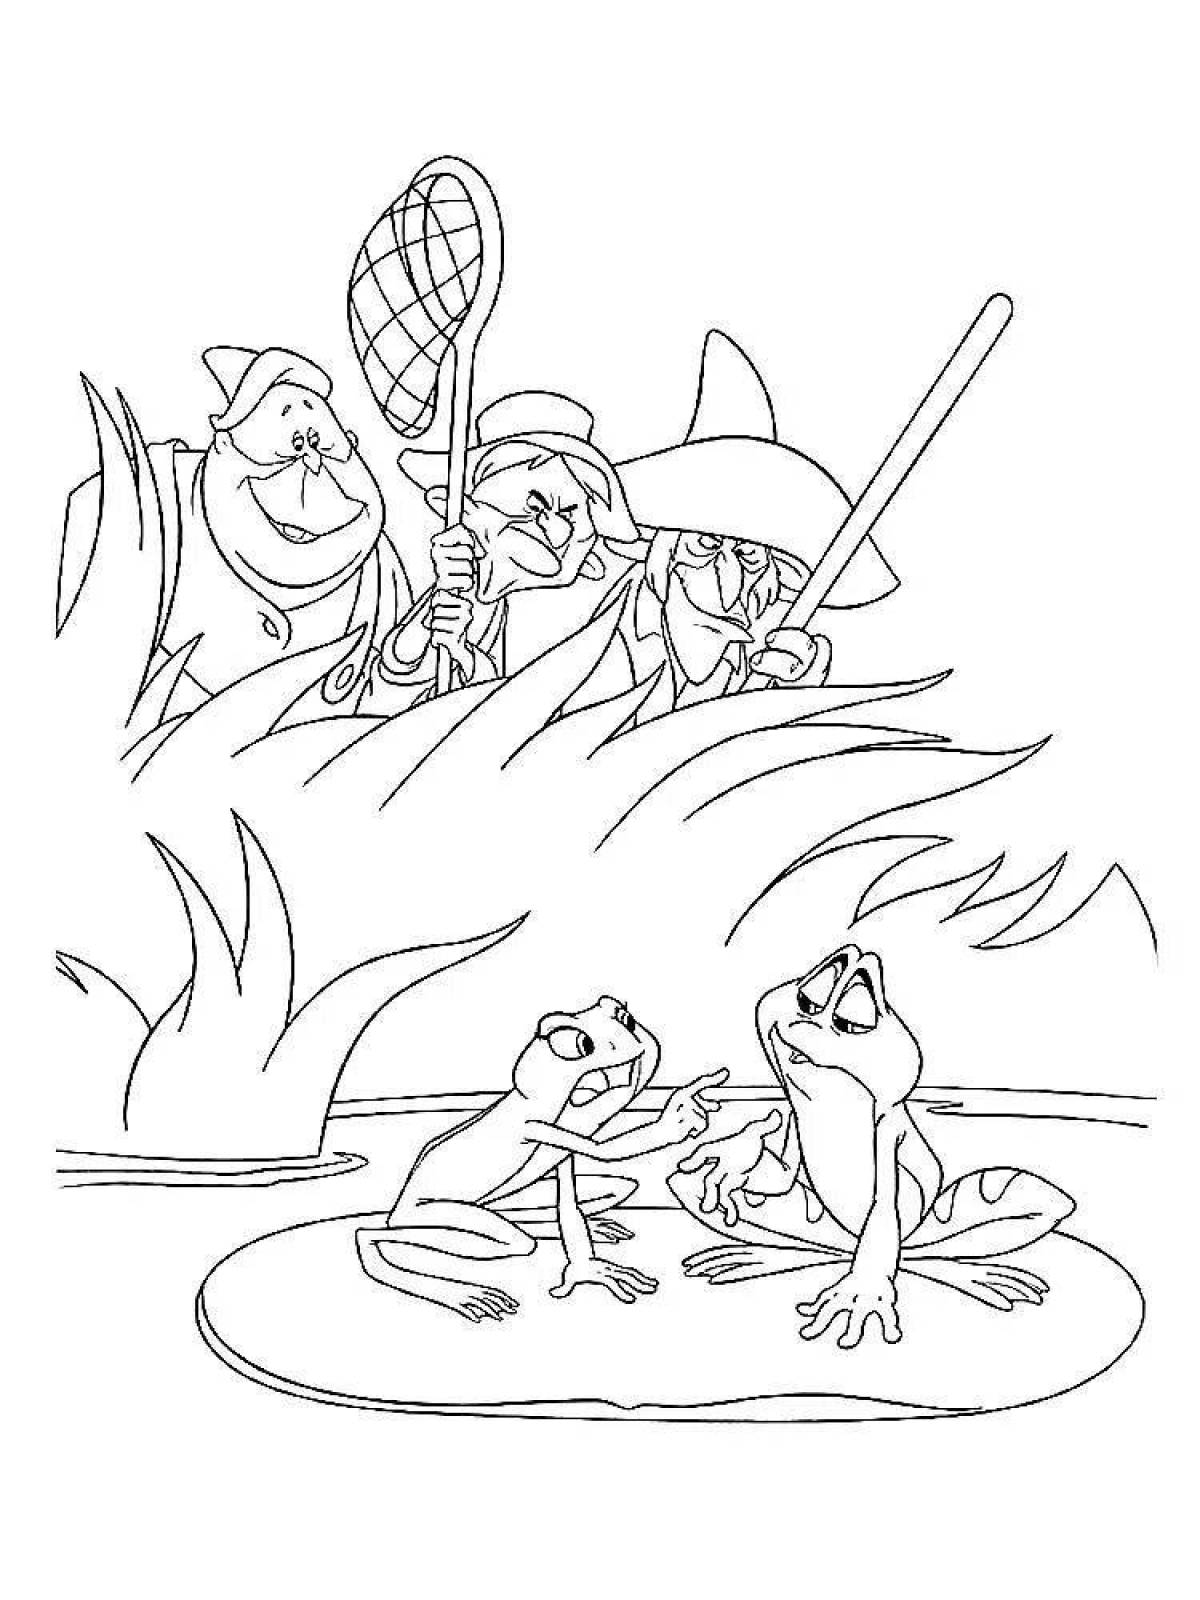 Witty frog princess coloring page